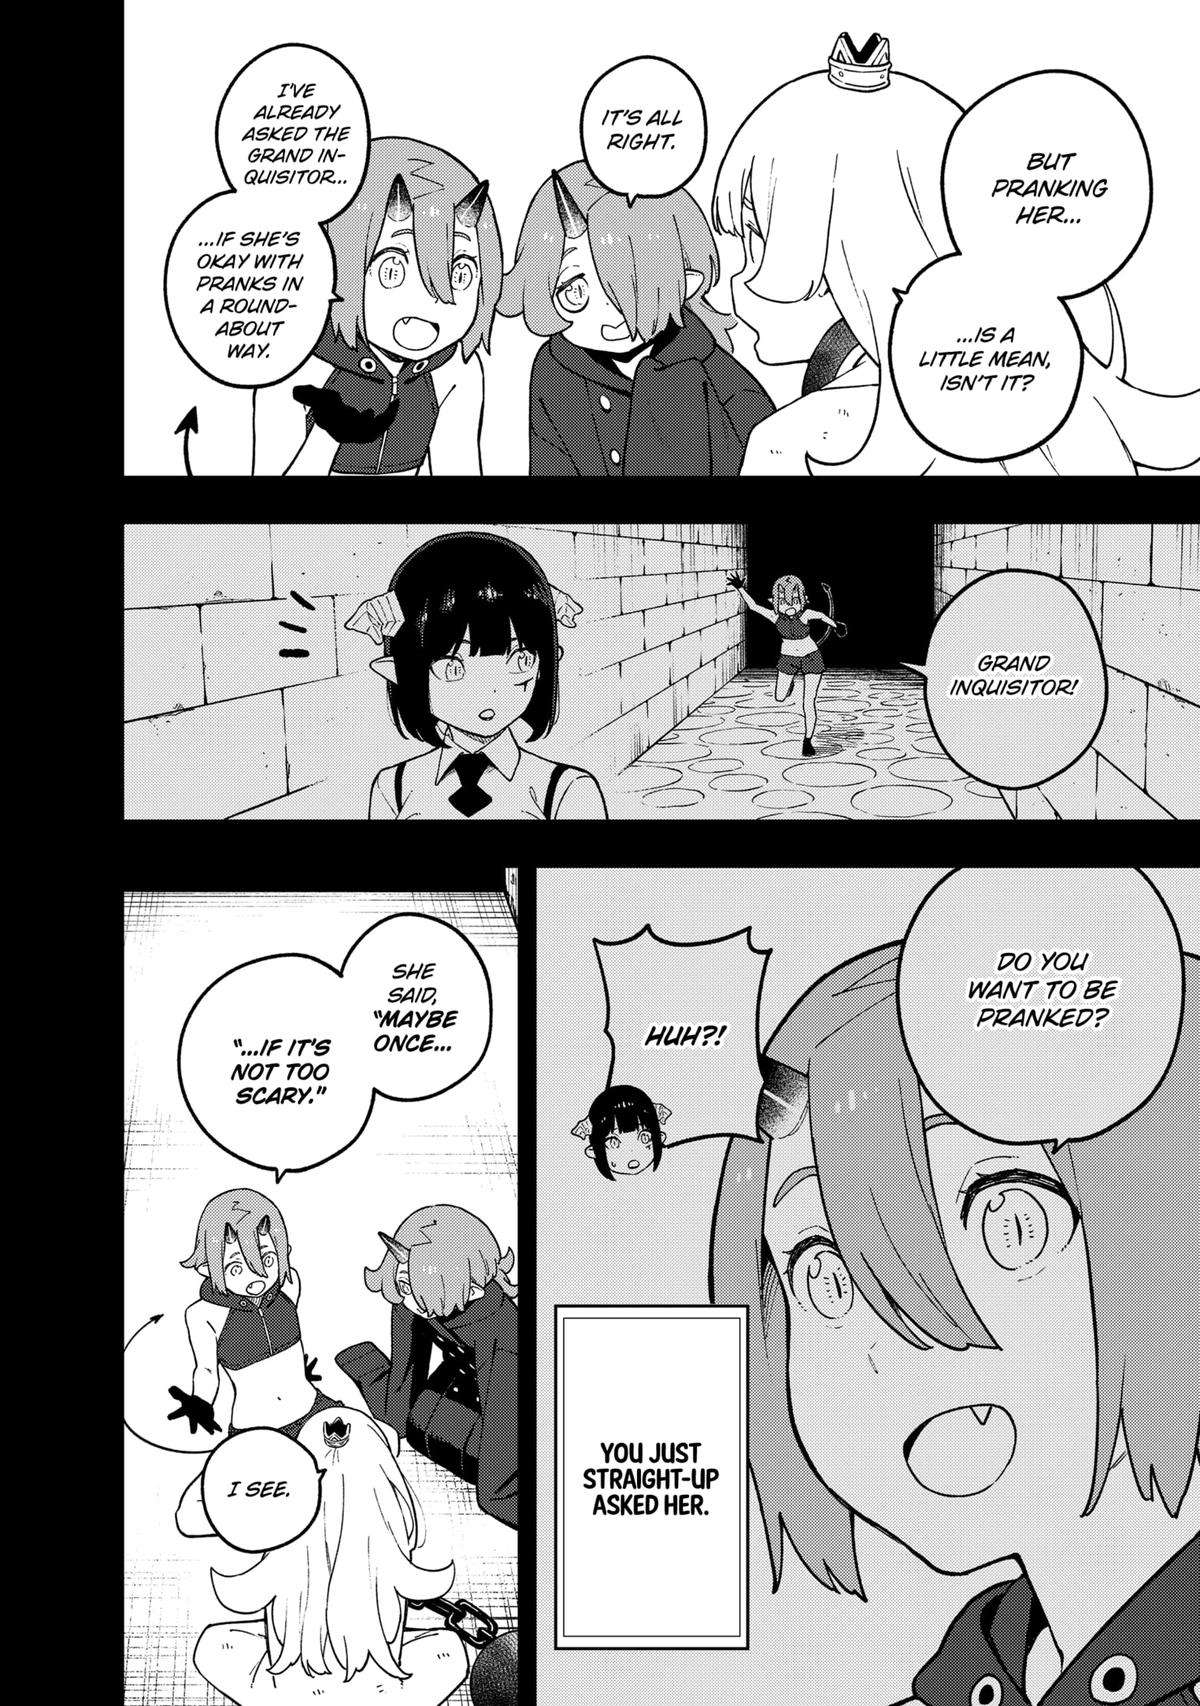 It's Time for "Interrogation", Princess! - chapter 215 - #4